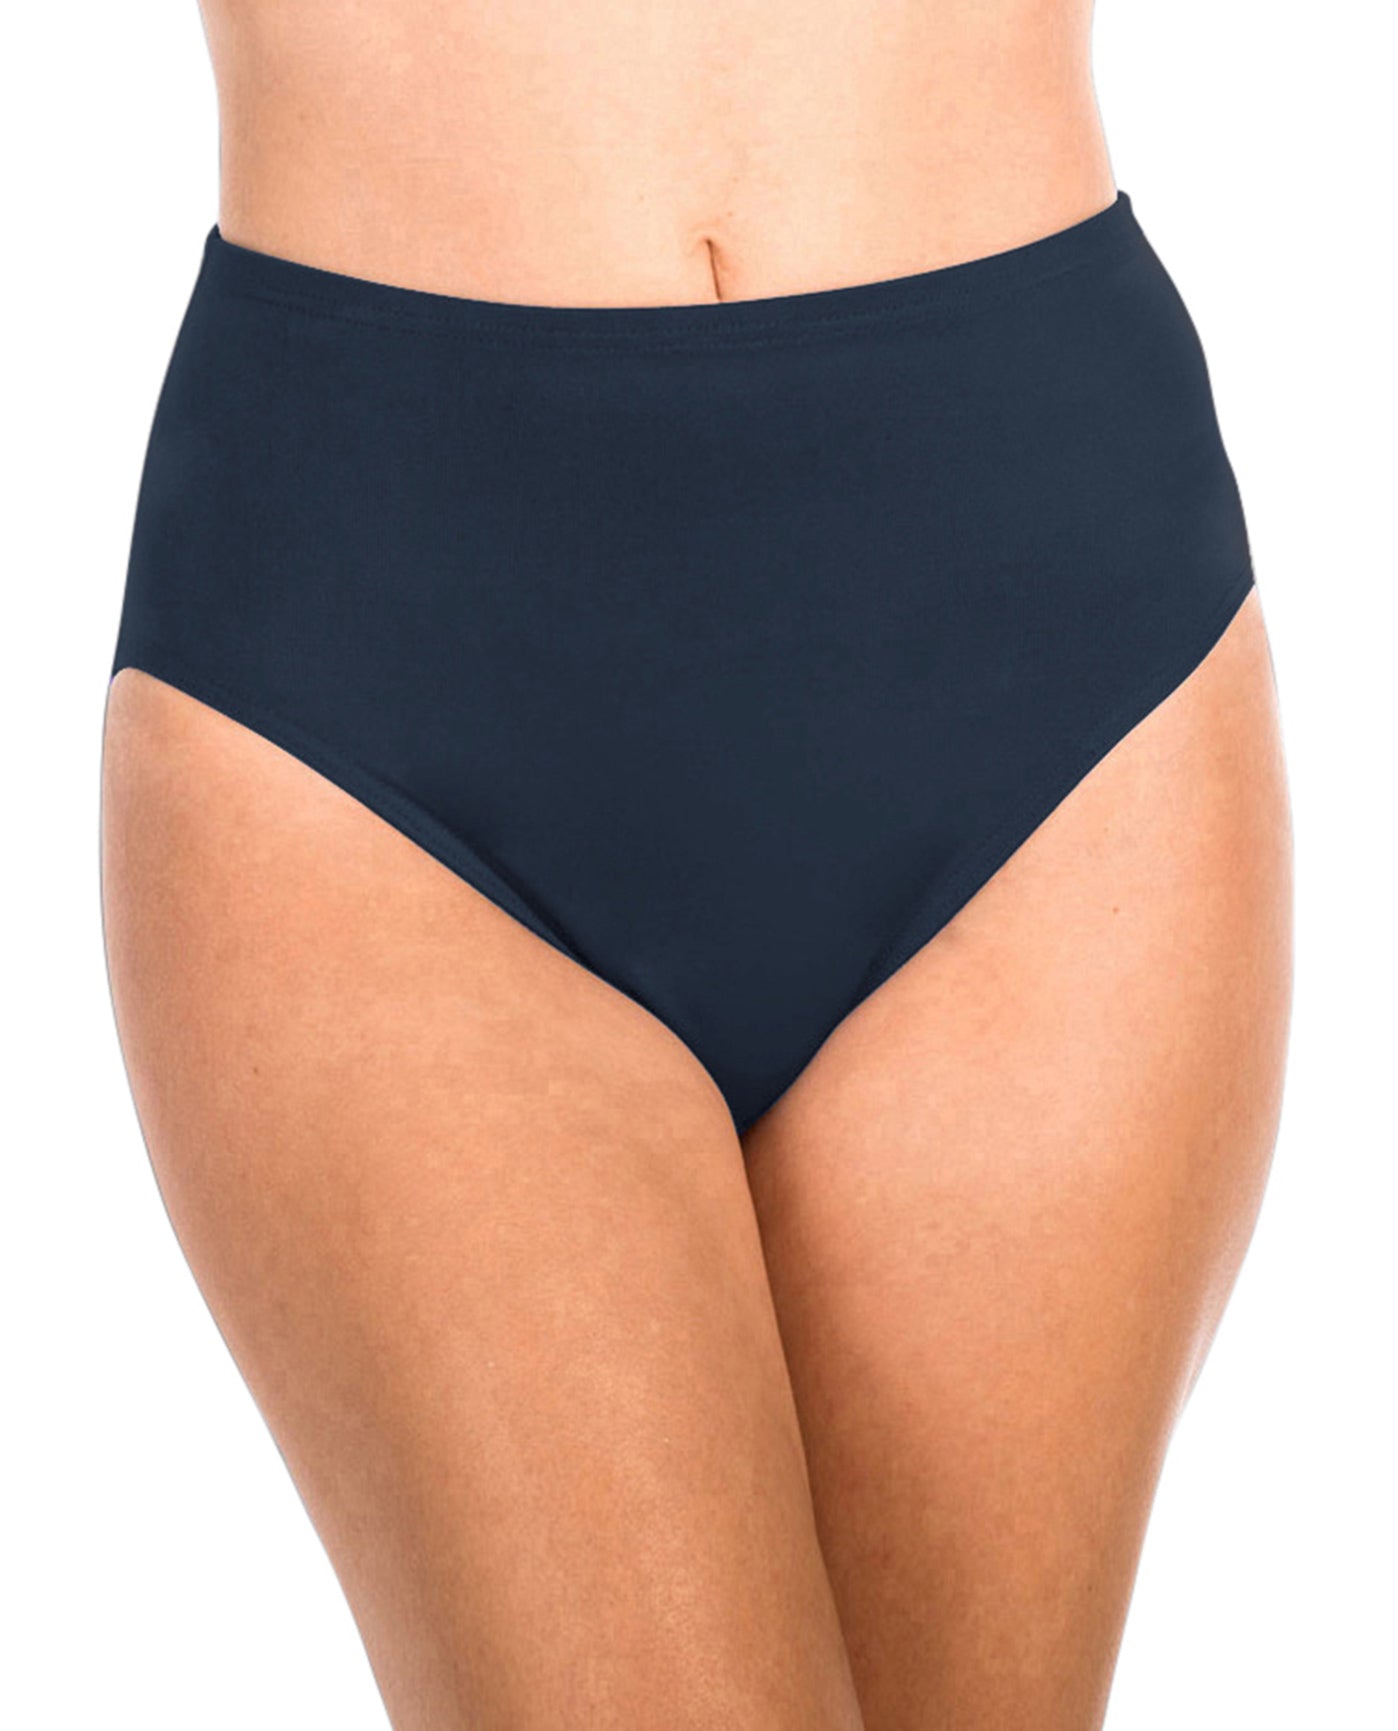 Front View Of Miraclesuit Solid Black Classic Brief Swim Bottom | MIR Blue